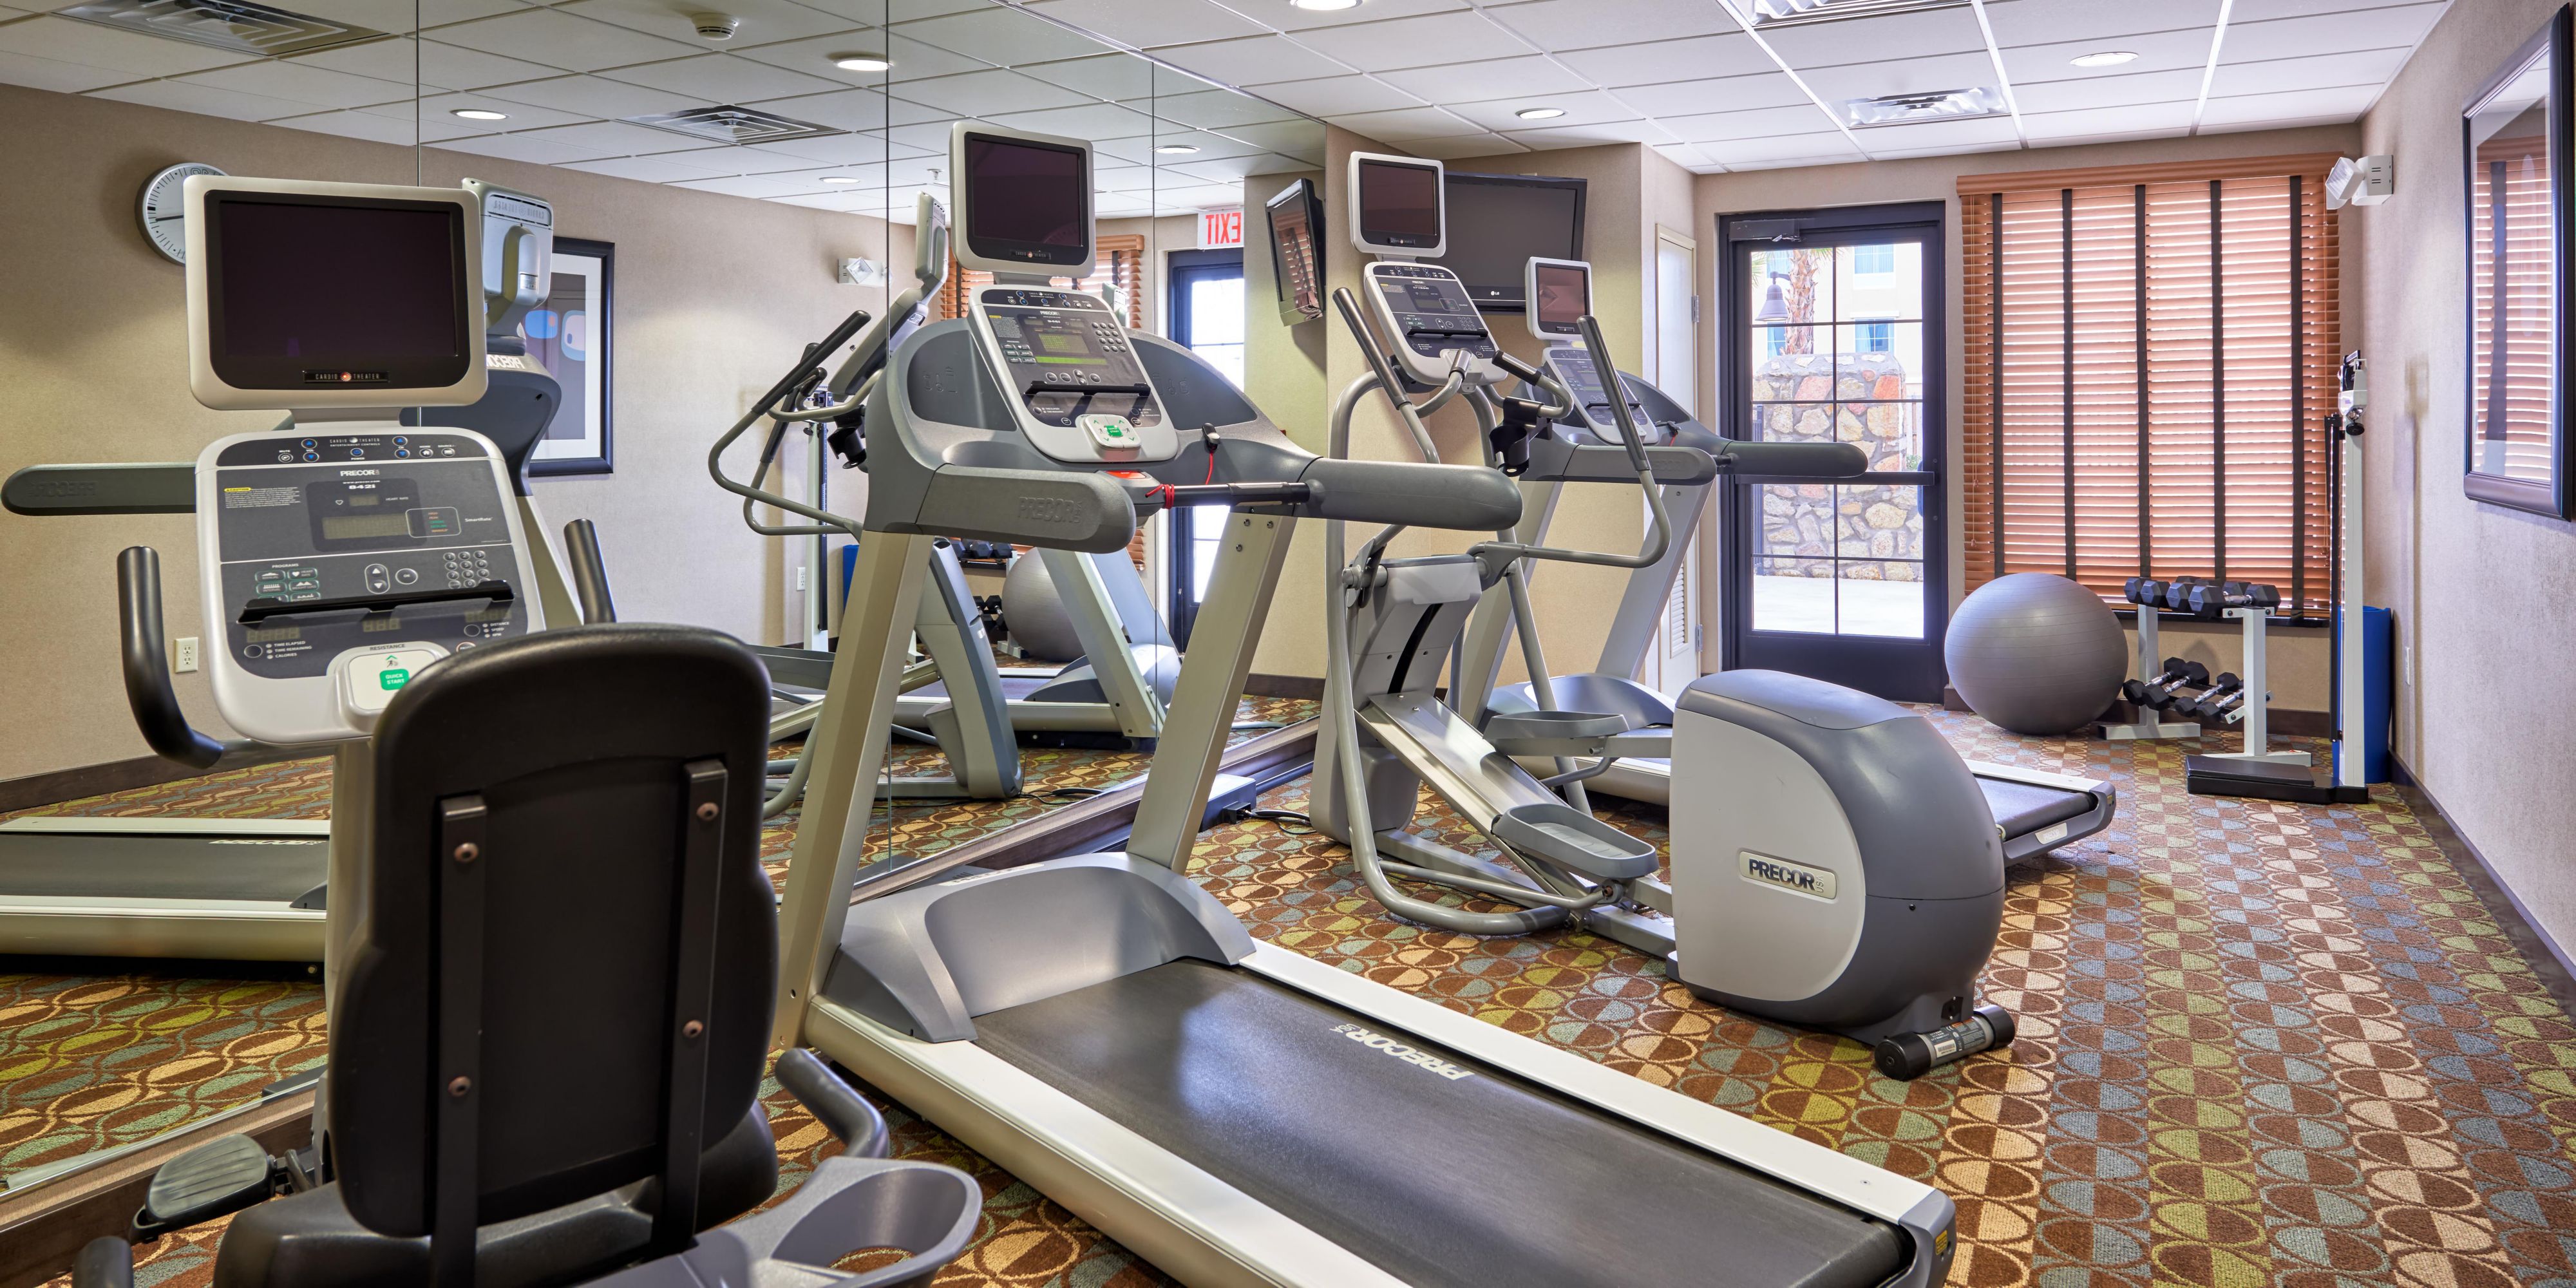 Don't get out of your fitness routine when traveling. Stay on top of your health and wellness regimen during your stay with access to our 24-hour fitness center.